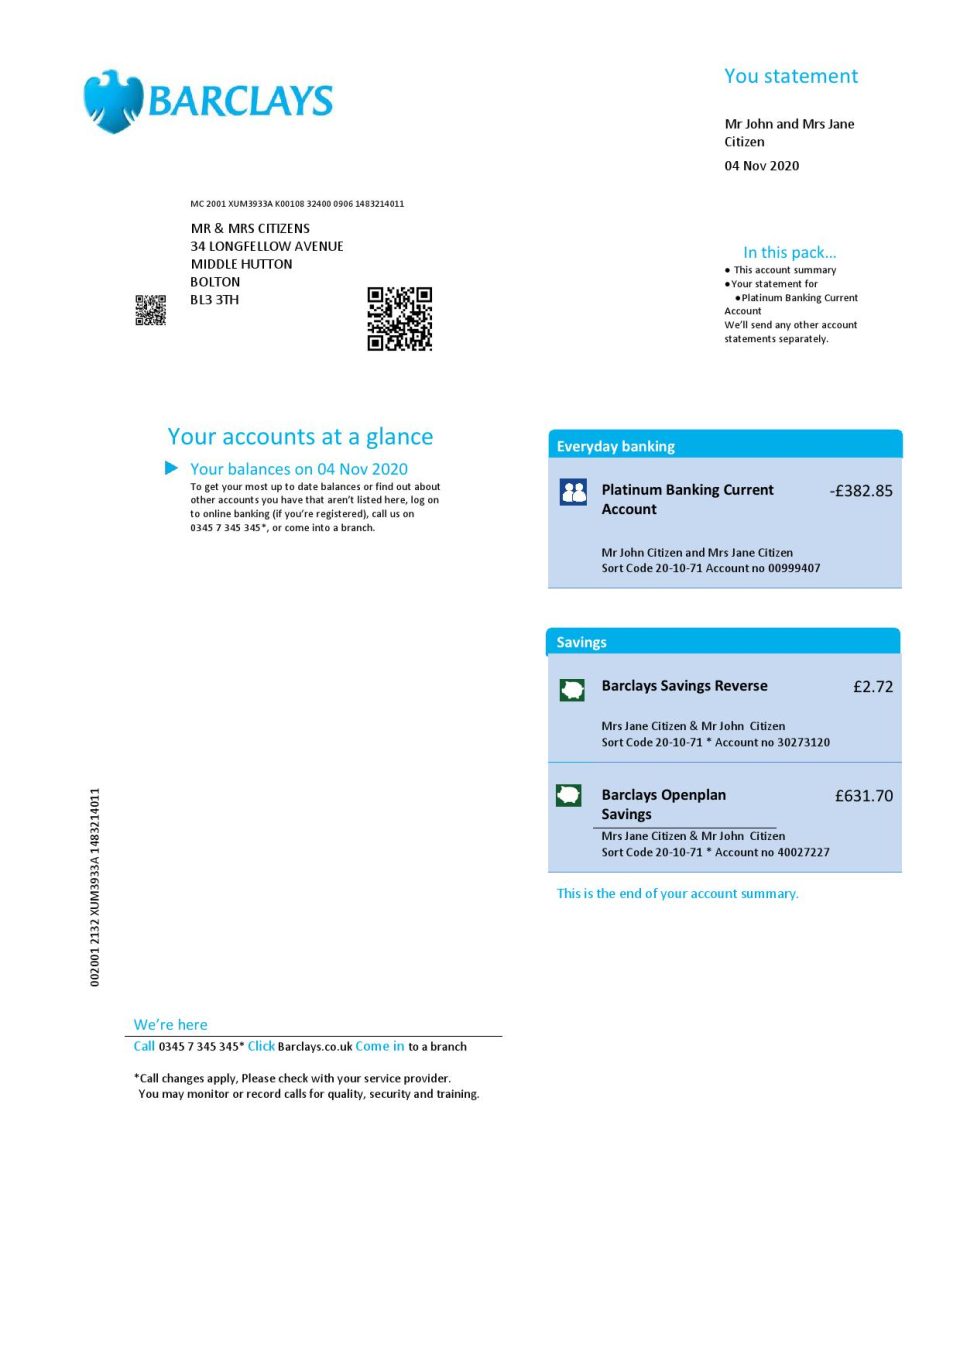 United Kingdom Barclays bank statement template in .doc and .pdf format, version 2